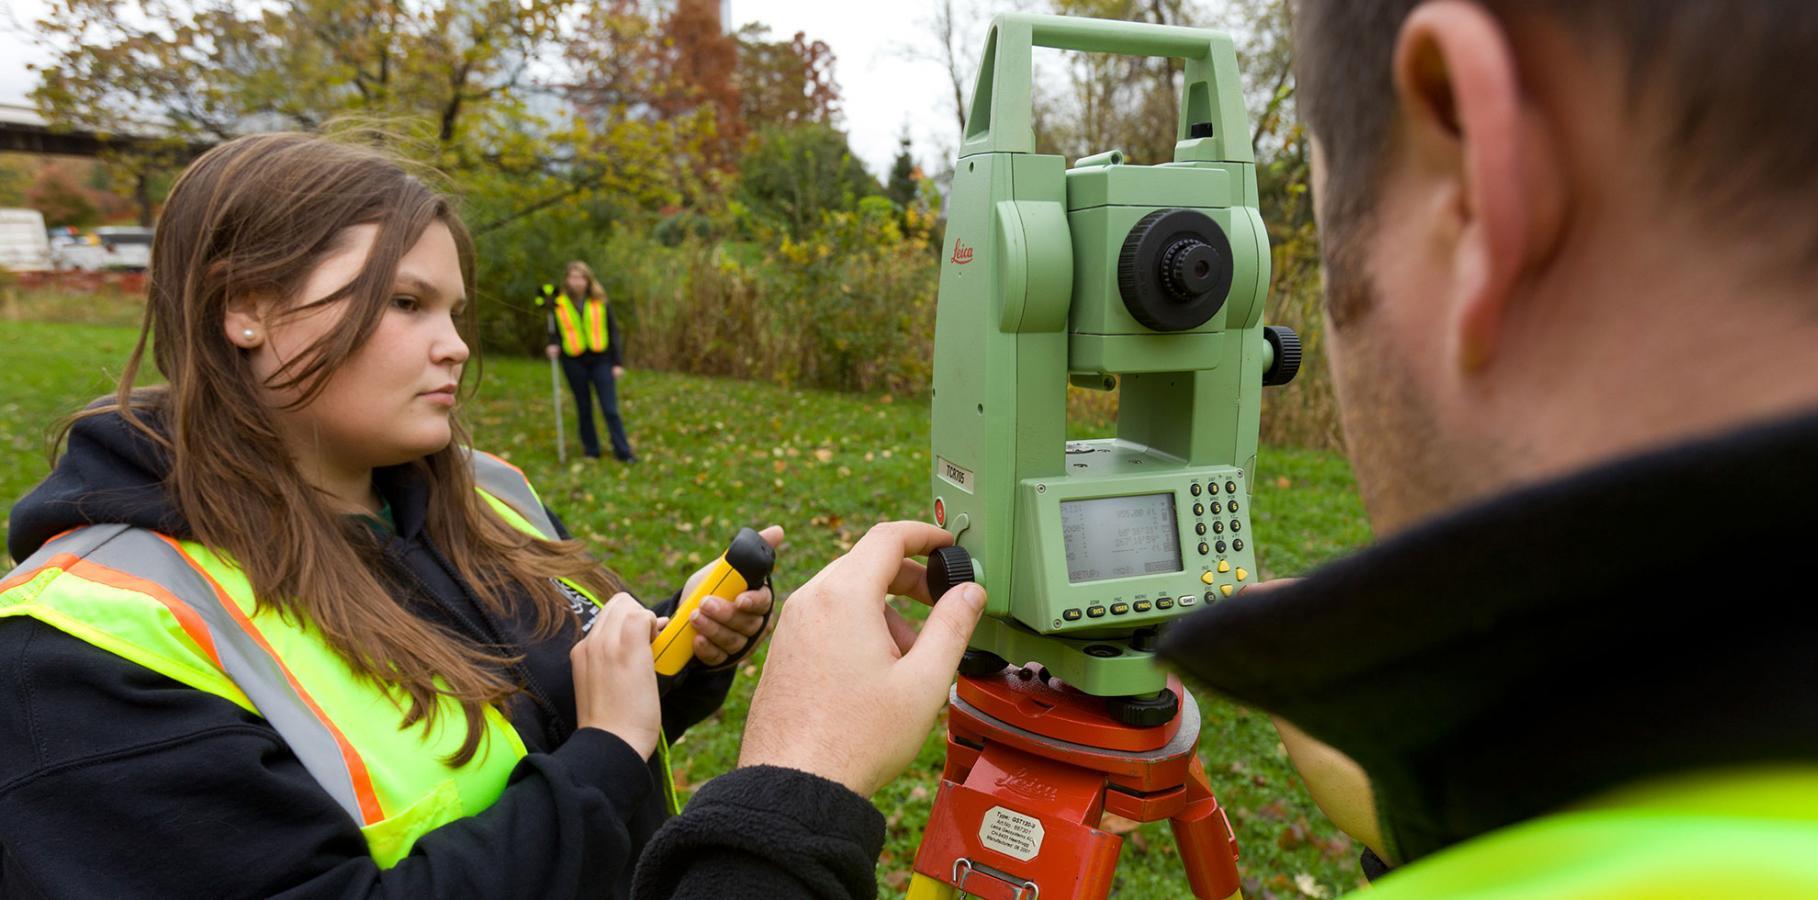 Working with surveying equipment in the field.